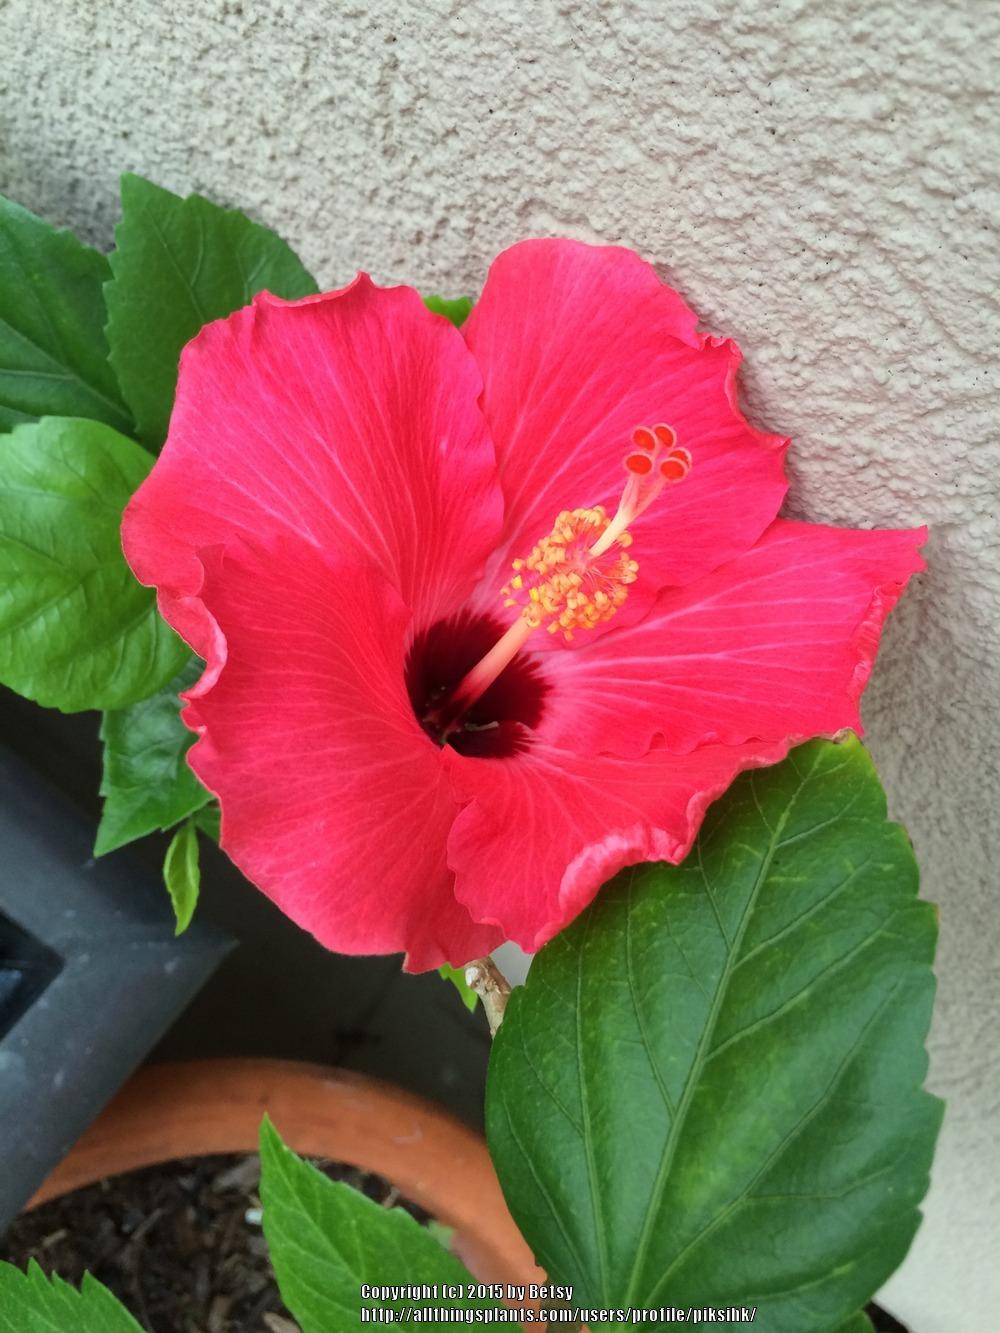 Photo of Hibiscus uploaded by piksihk